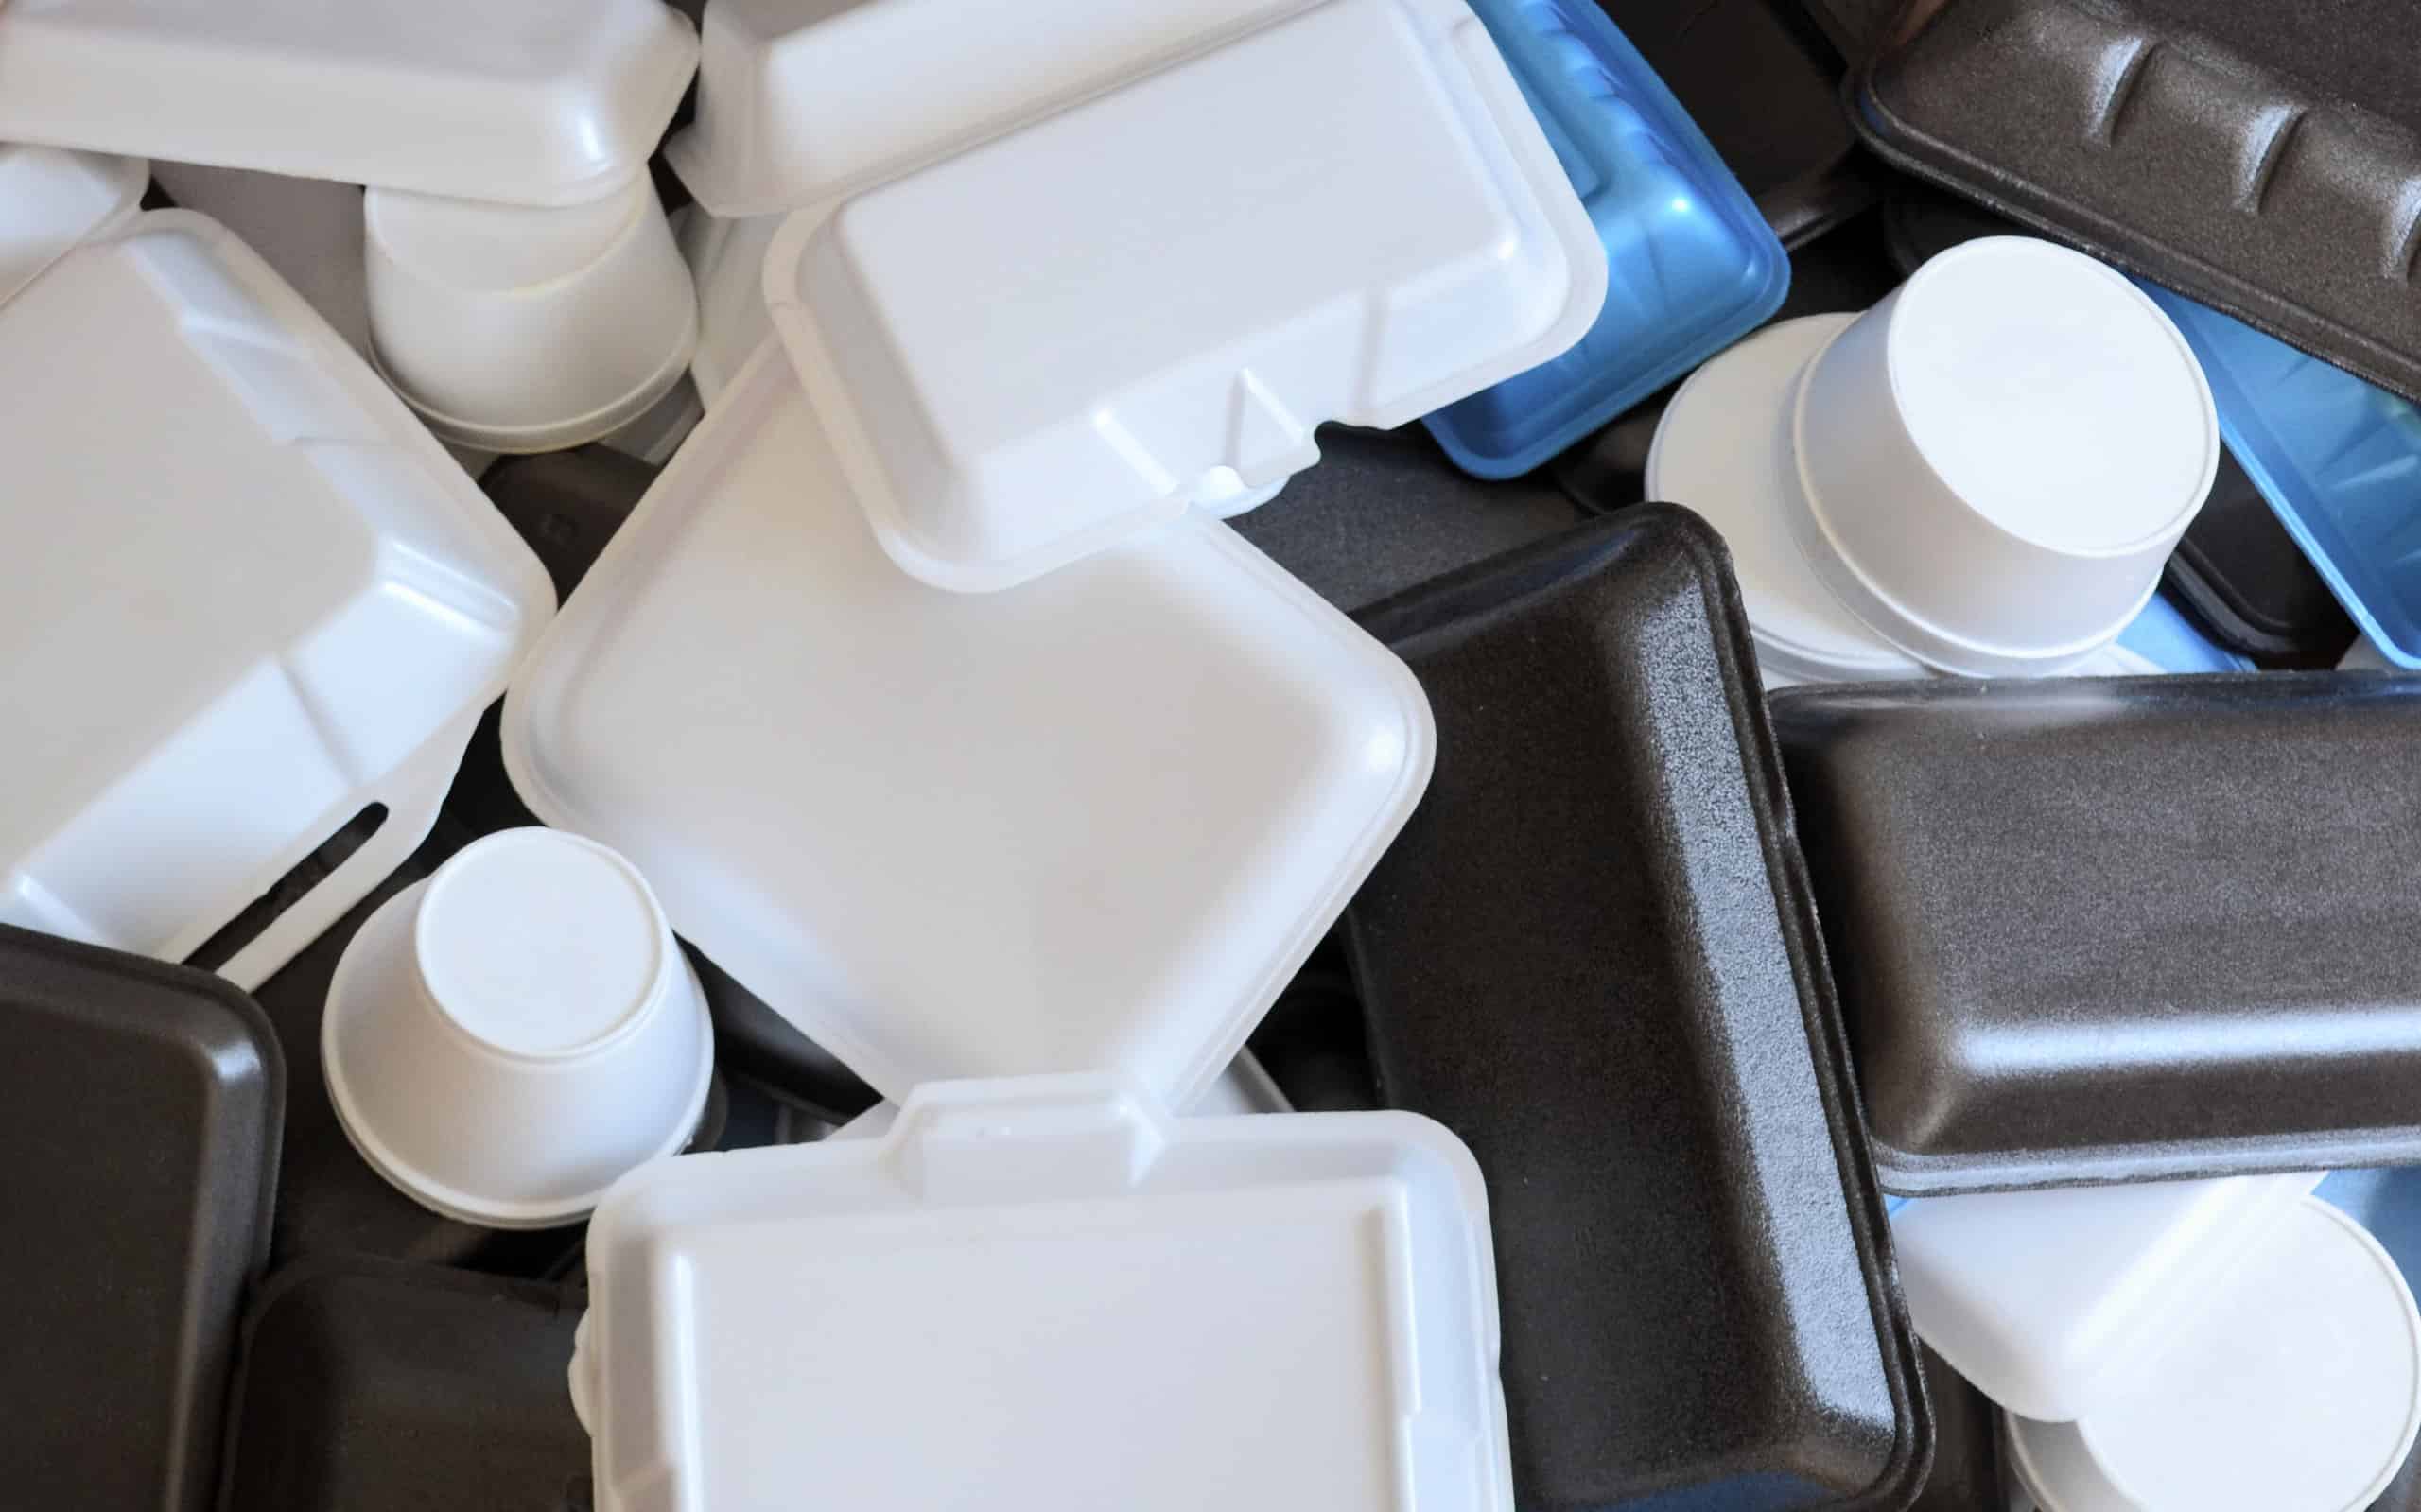 Amount of styrofoam containers